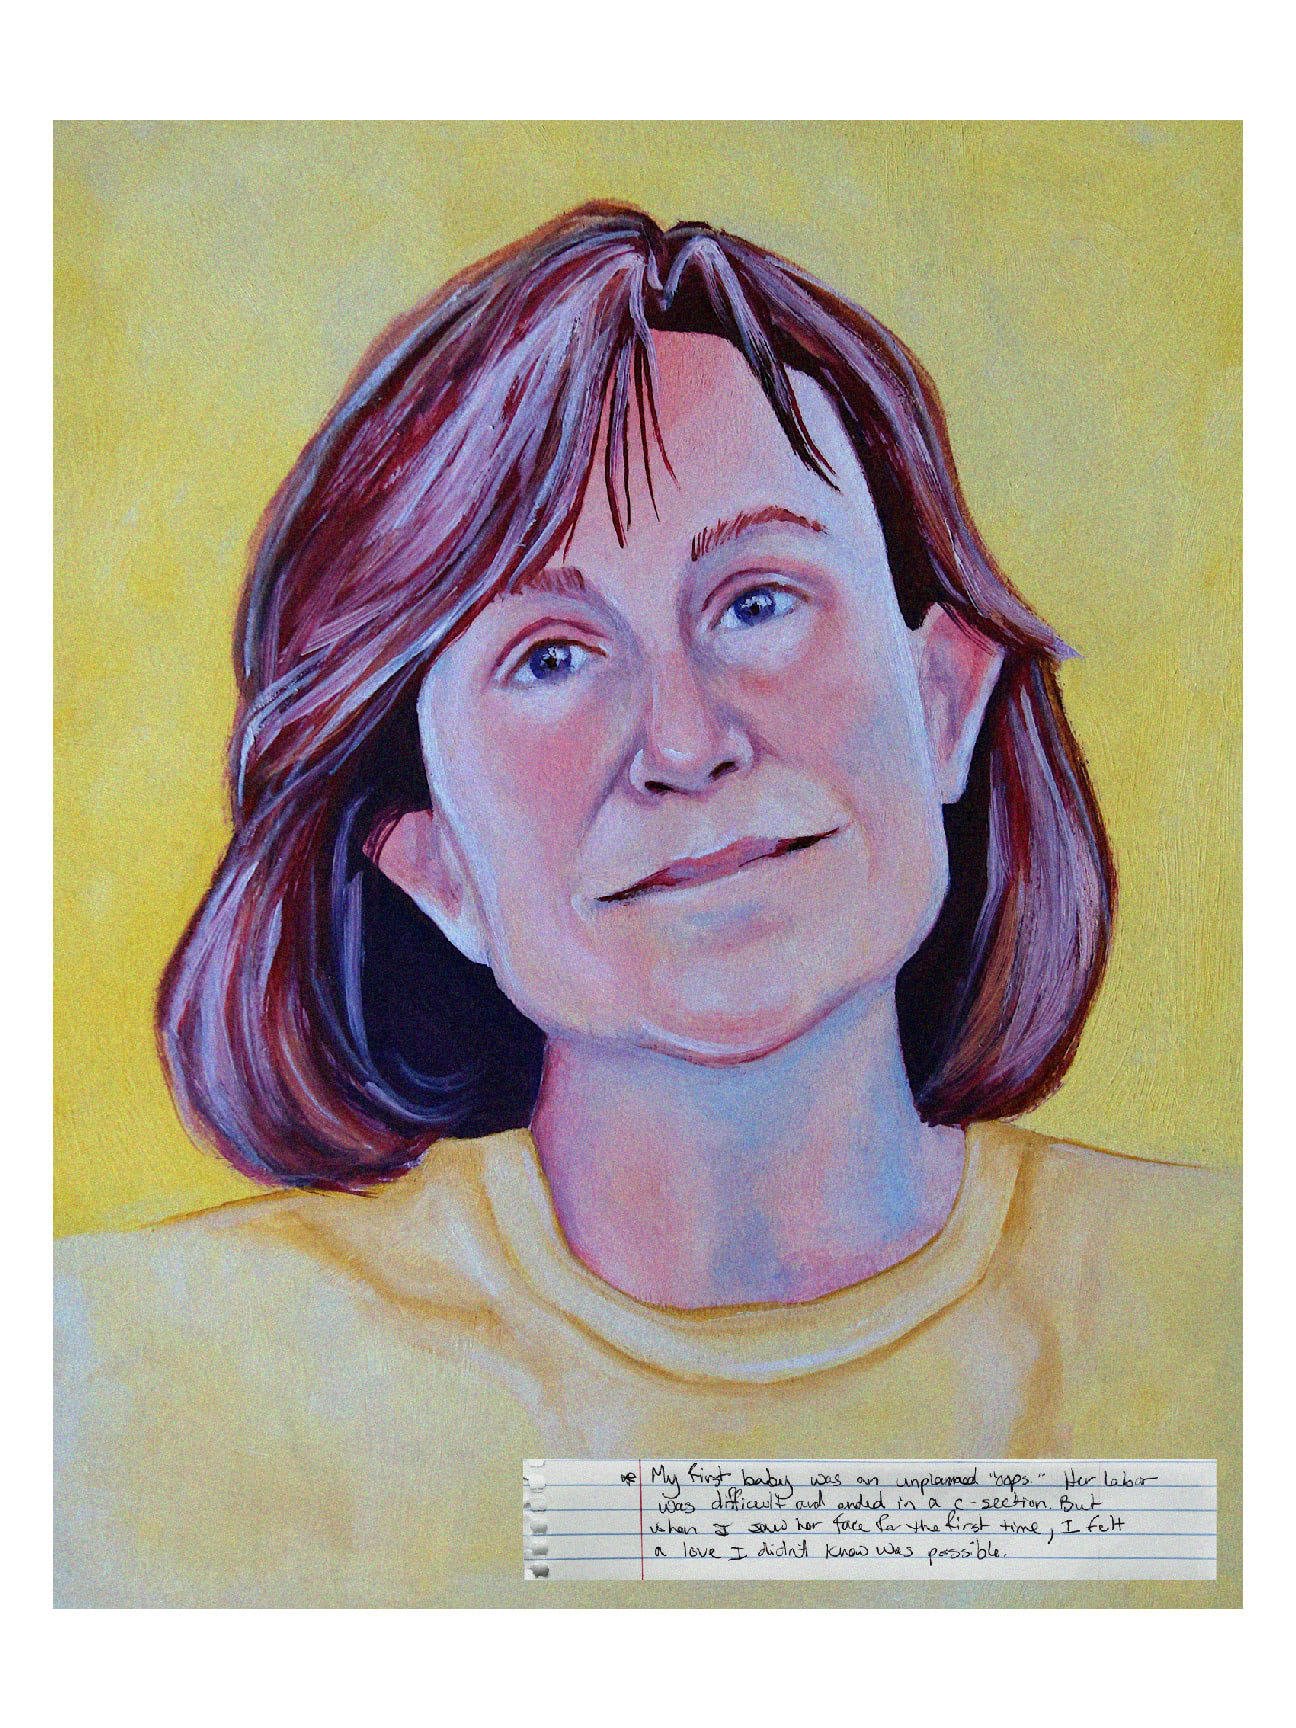 A painting of my mom, a brunette with bangs, looking at the viewer with a content and peaceful look on her face.